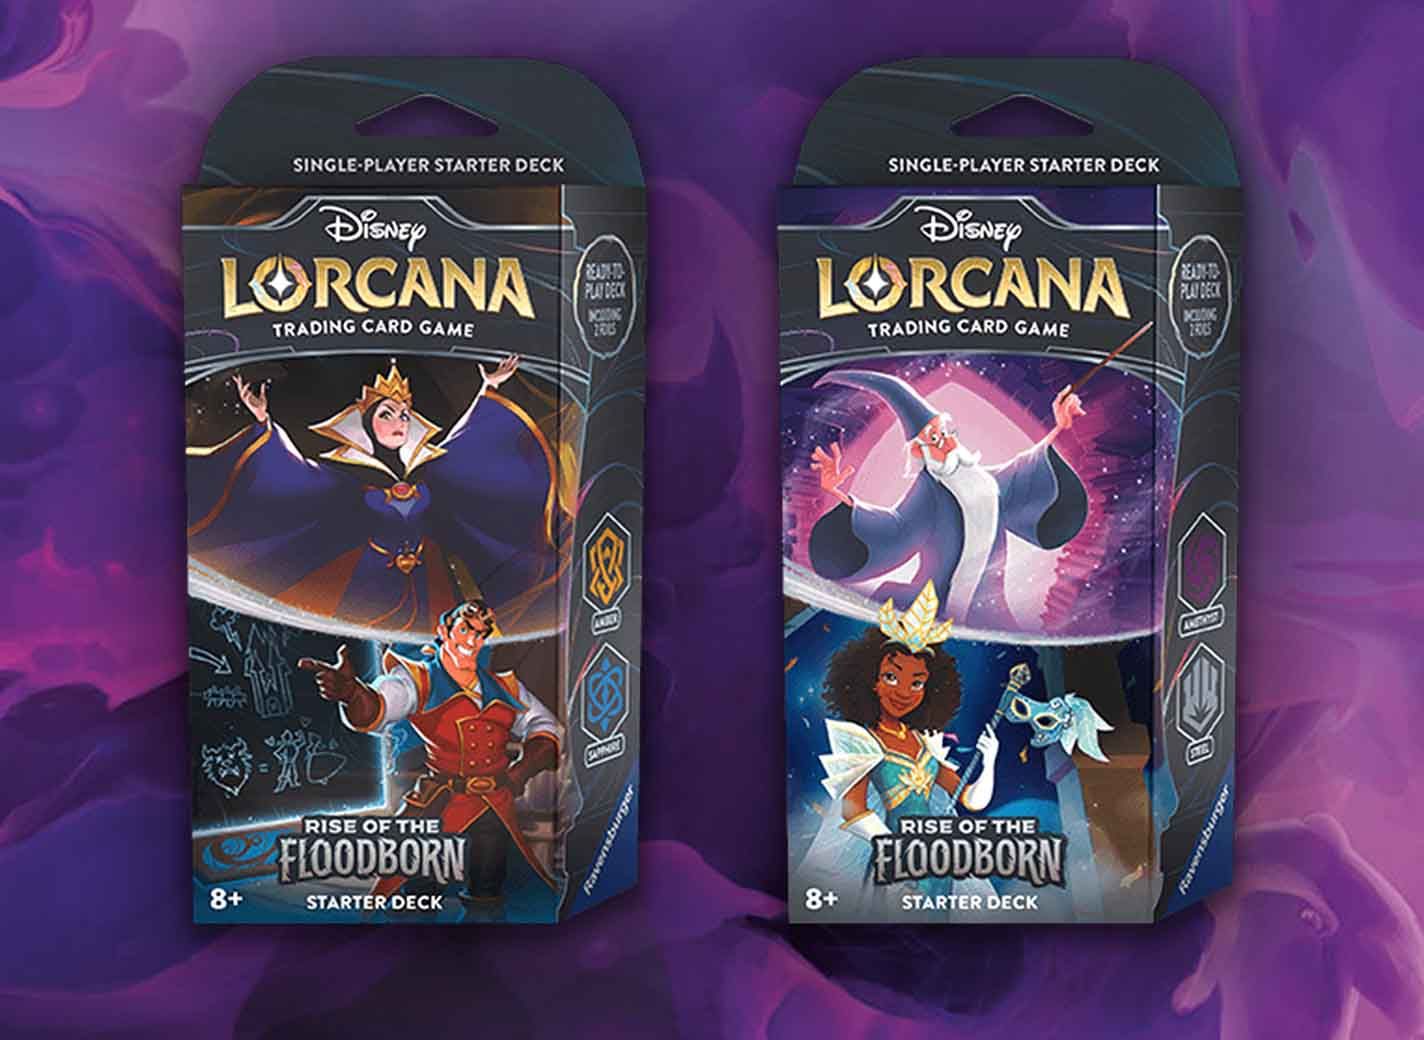 What's In The Disney Lorcana: Rise Of The Floodborn Starter Decks?